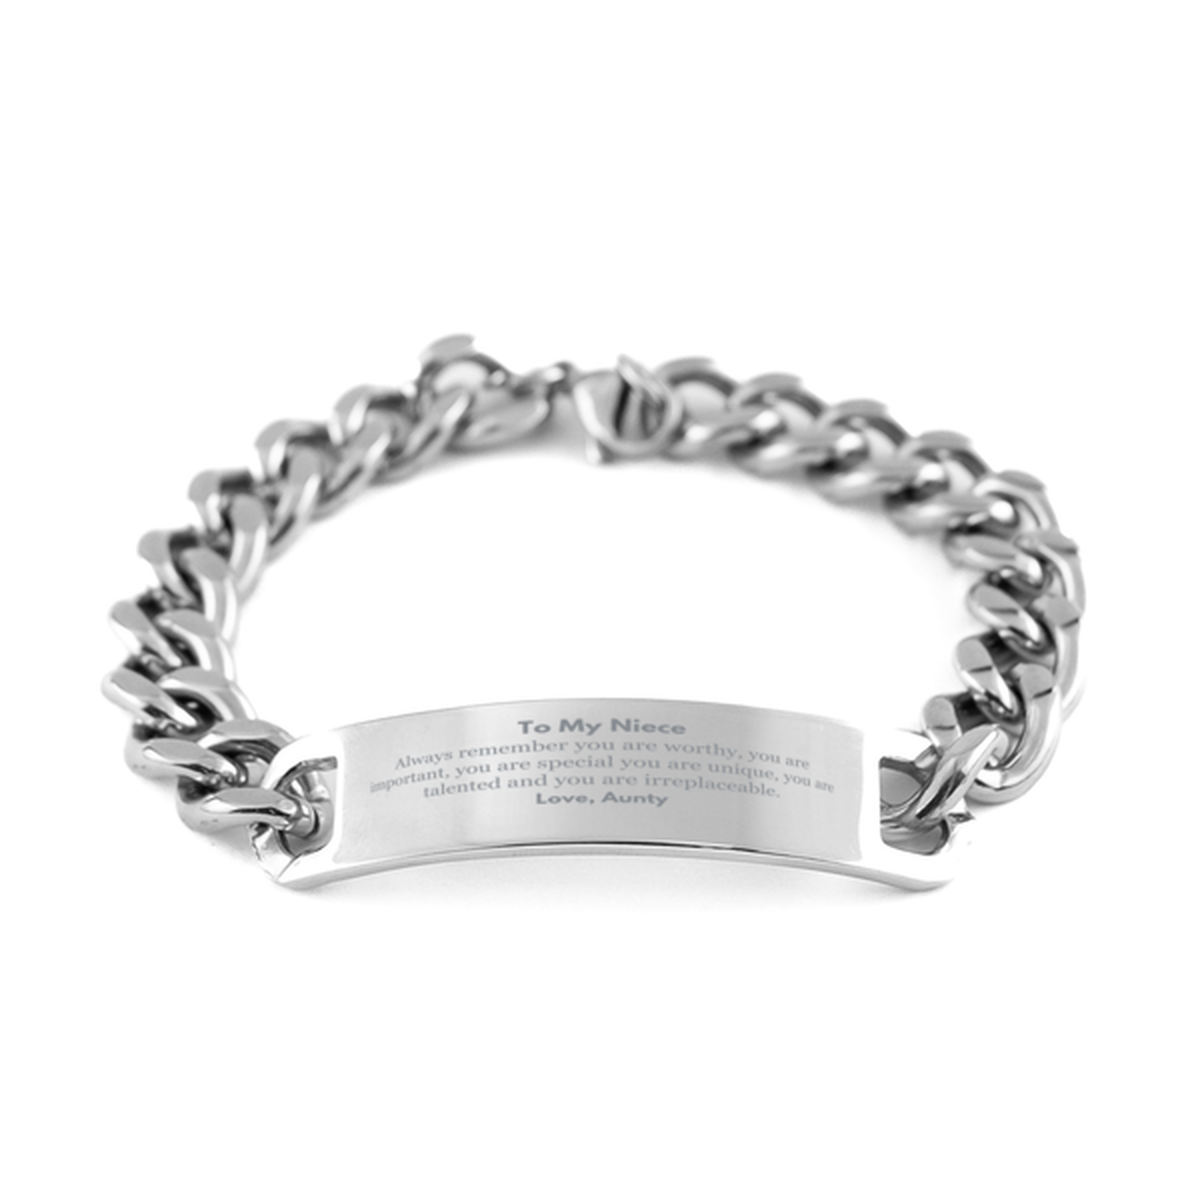 Niece Birthday Gifts from Aunty, Inspirational Cuban Chain Stainless Steel Bracelet for Niece Christmas Graduation Gifts for Niece Always remember you are worthy, you are important. Love, Aunty